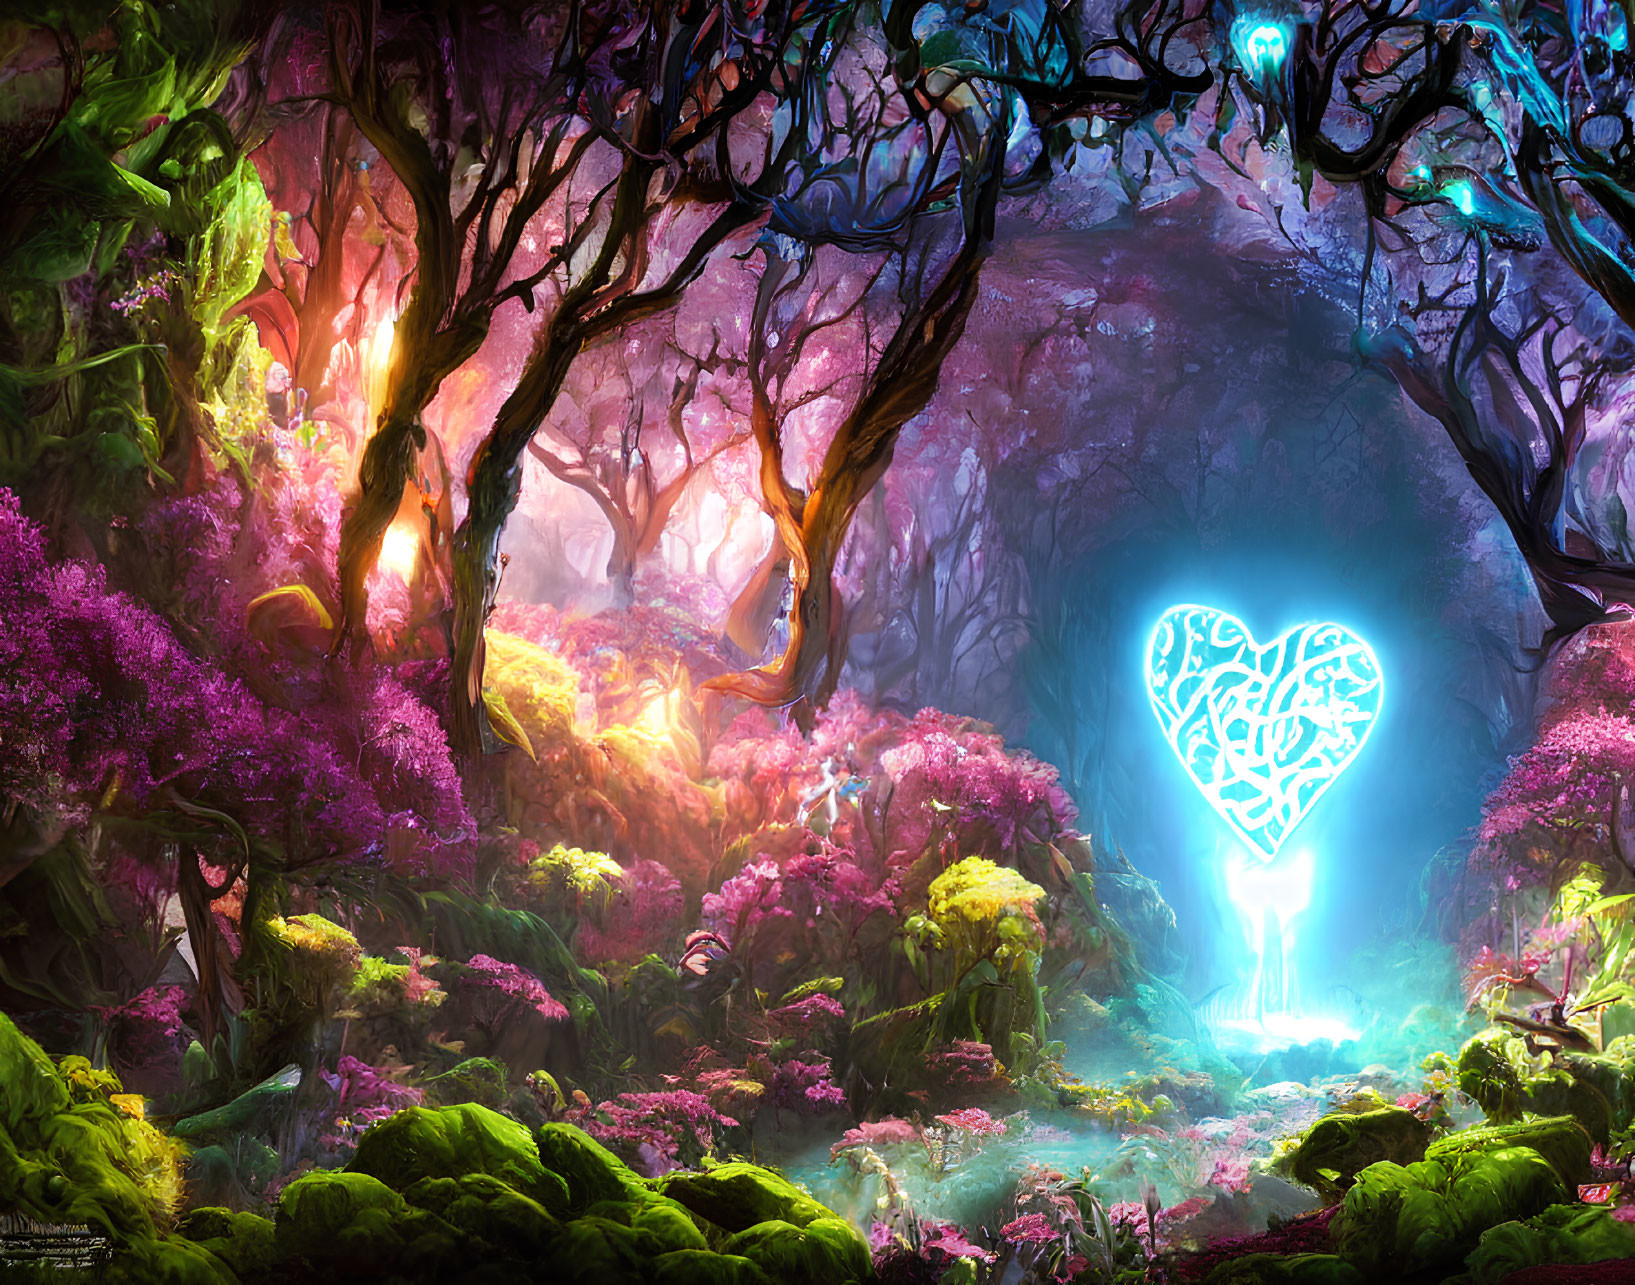 Fantasy forest with heart symbol, twisted trees, vivid flora & luminescent tunnel